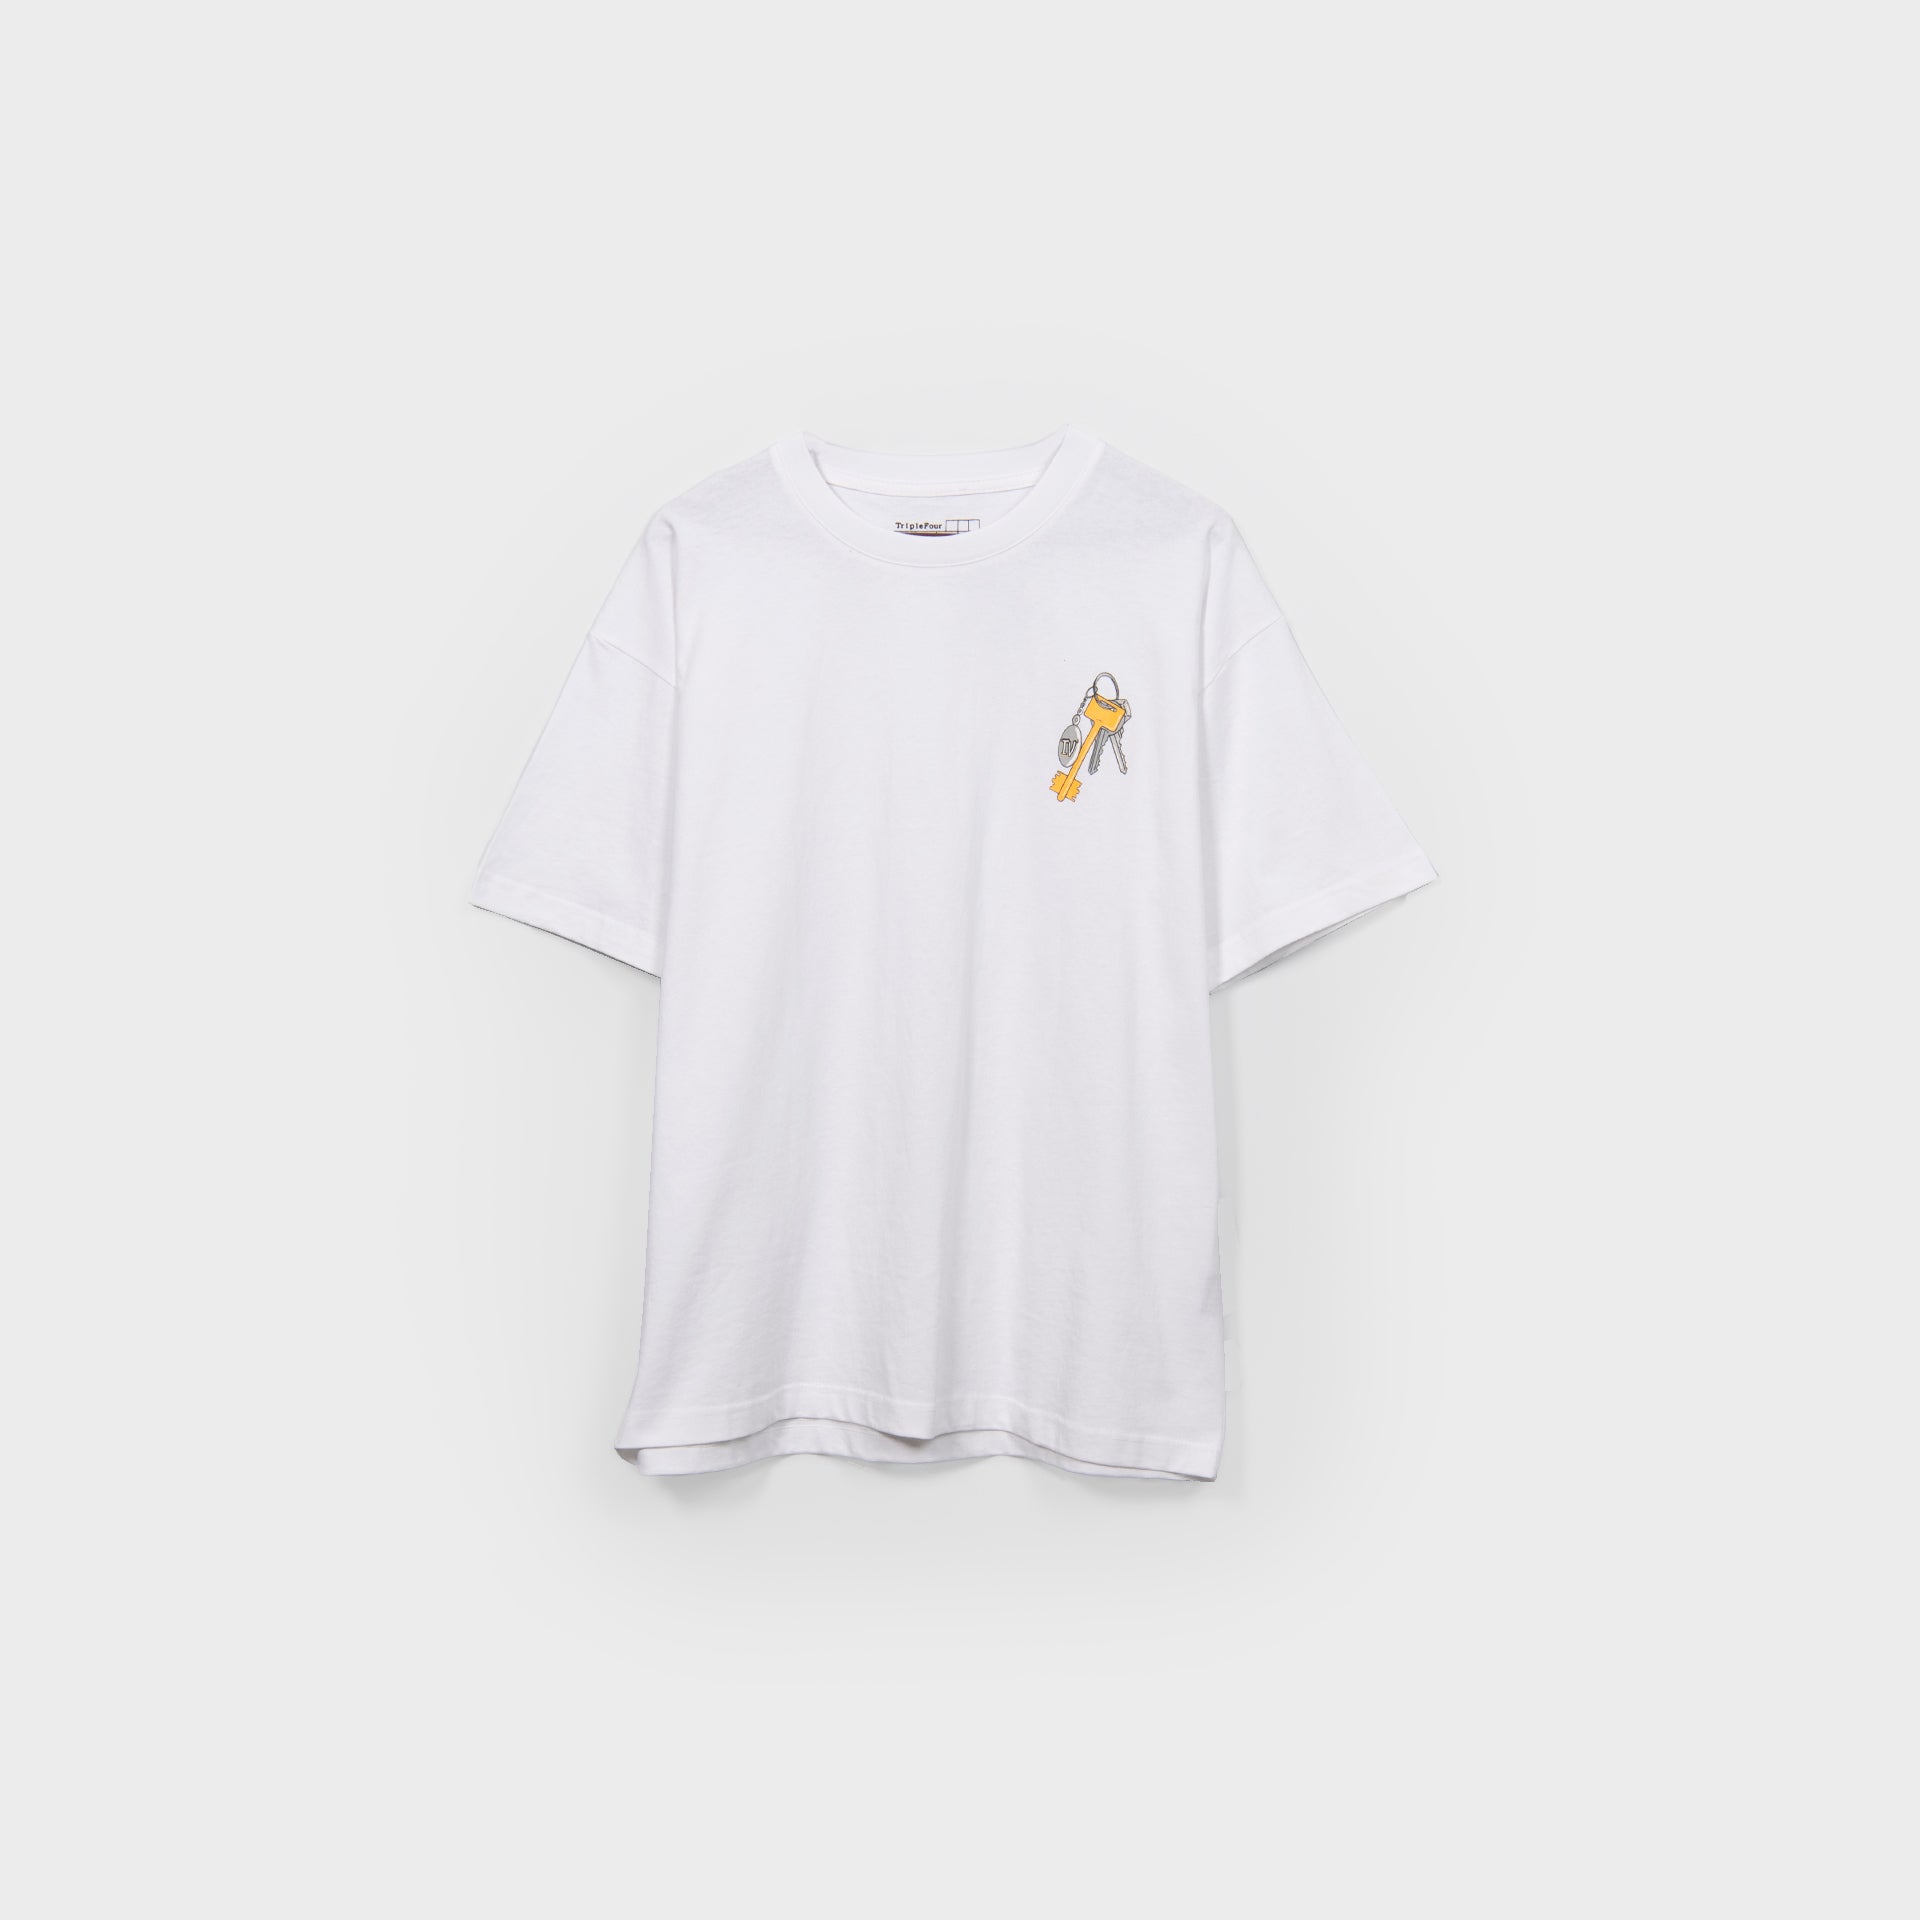 White T-shirt "Old Keys" From Triple Four